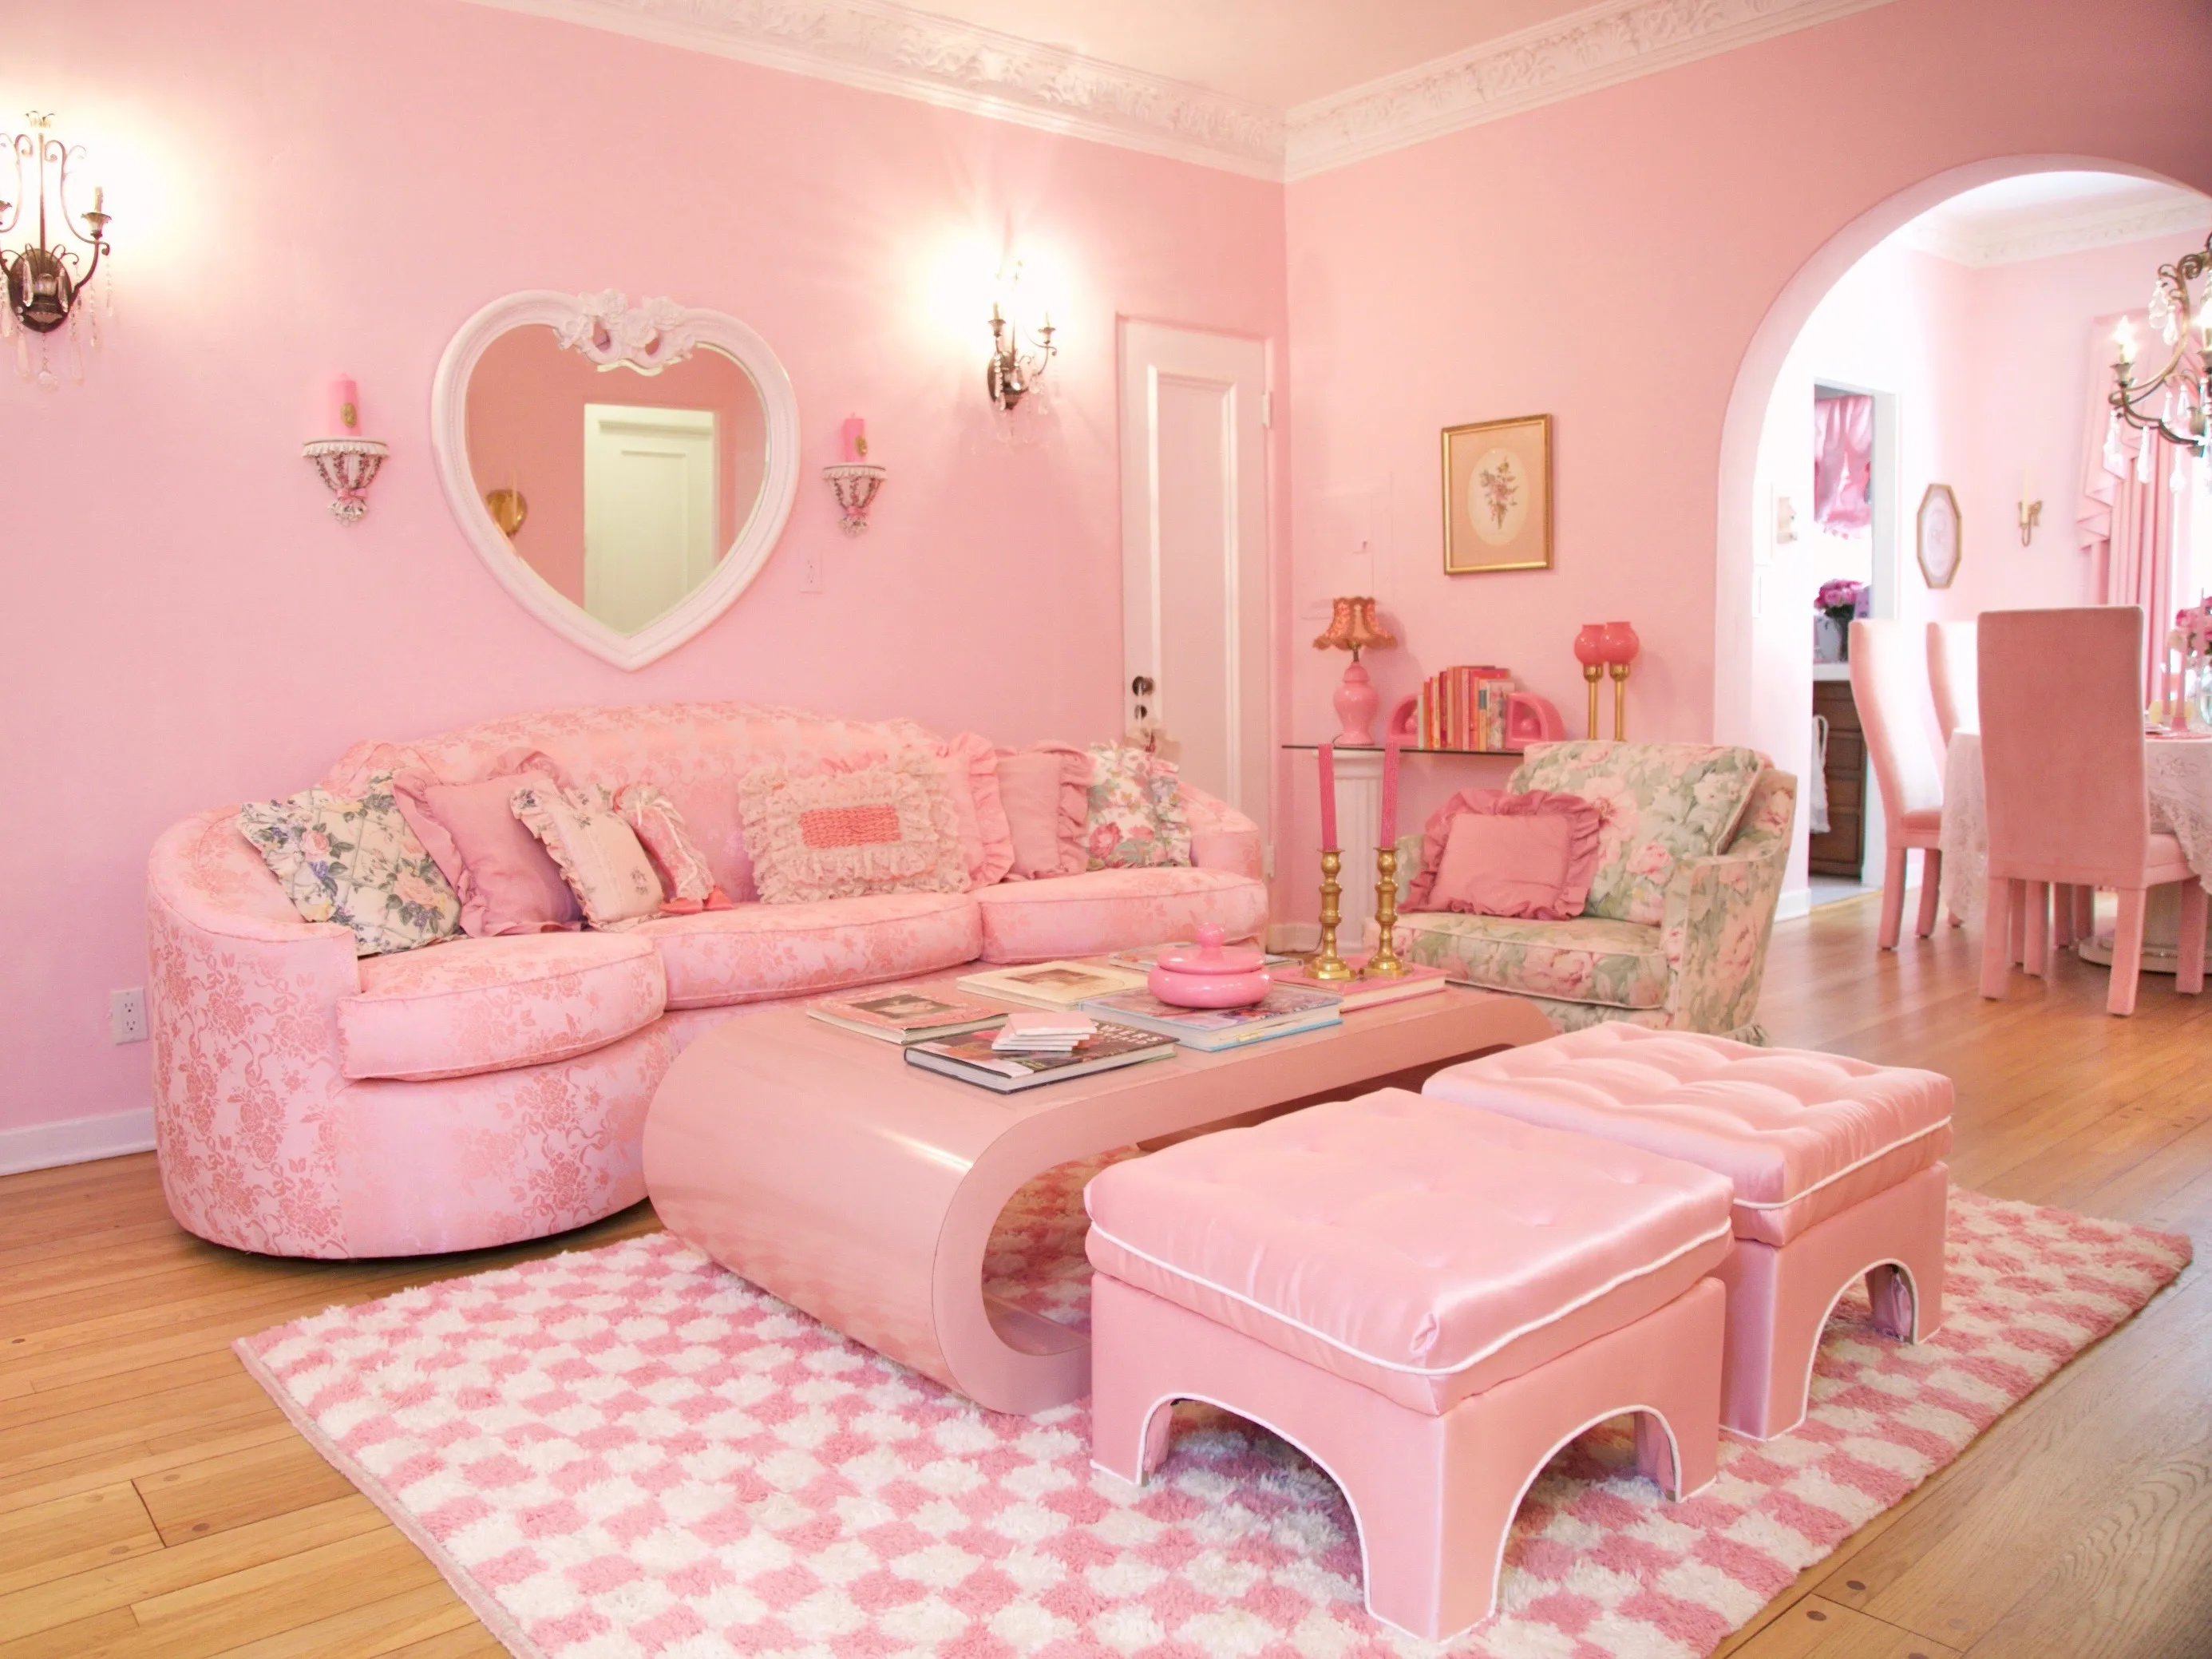 Barbiecore: A Trend To Create Your Own Dreamhouse